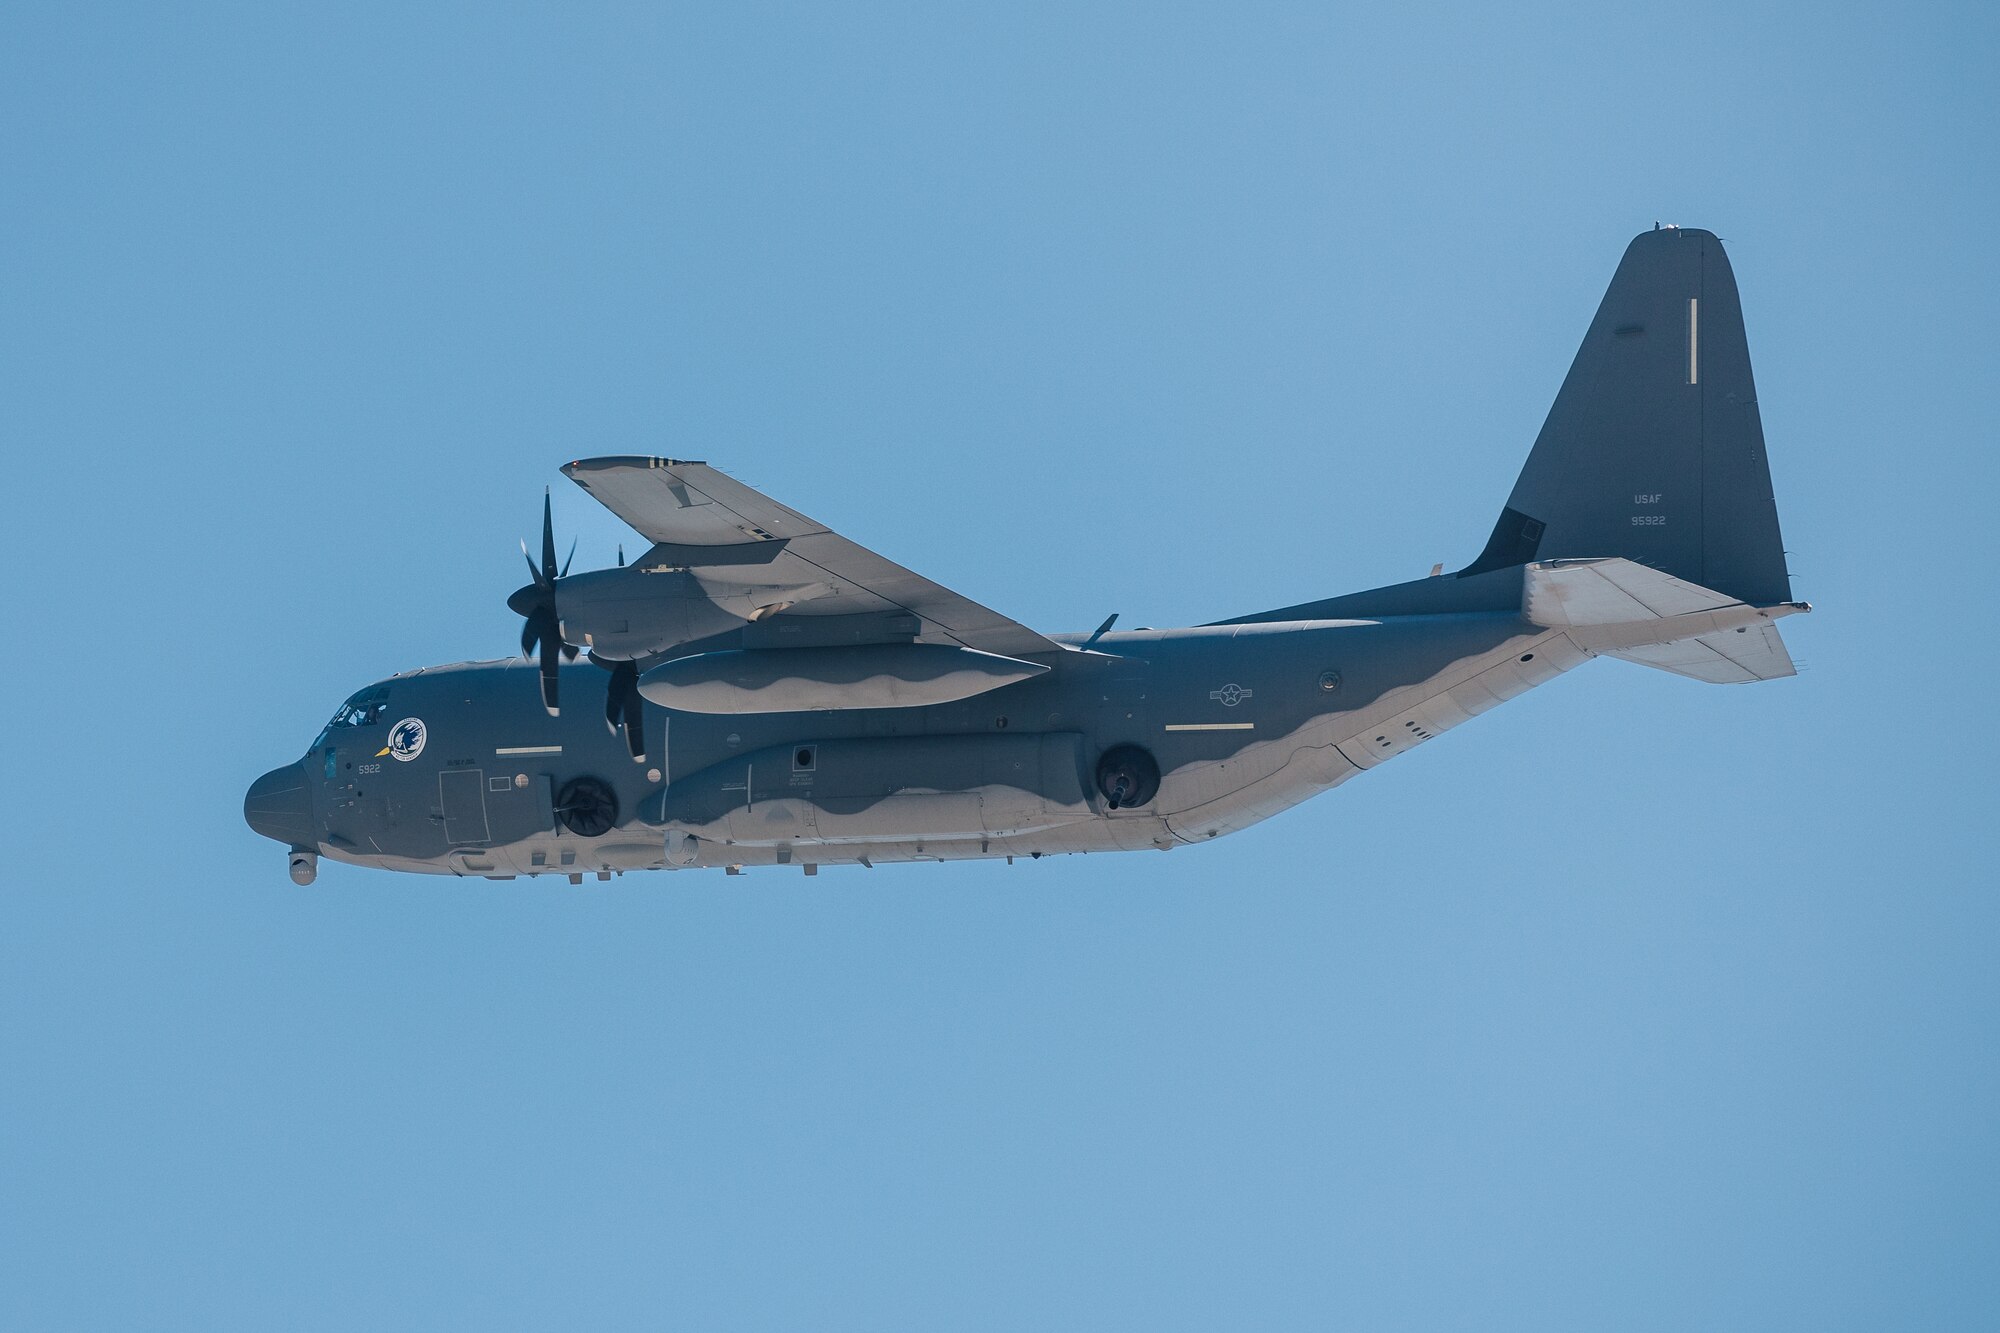 An AC-130J Ghostrider aircraft in the air at the U.S. Air Force Academy, Colorado on May 5, 2023.